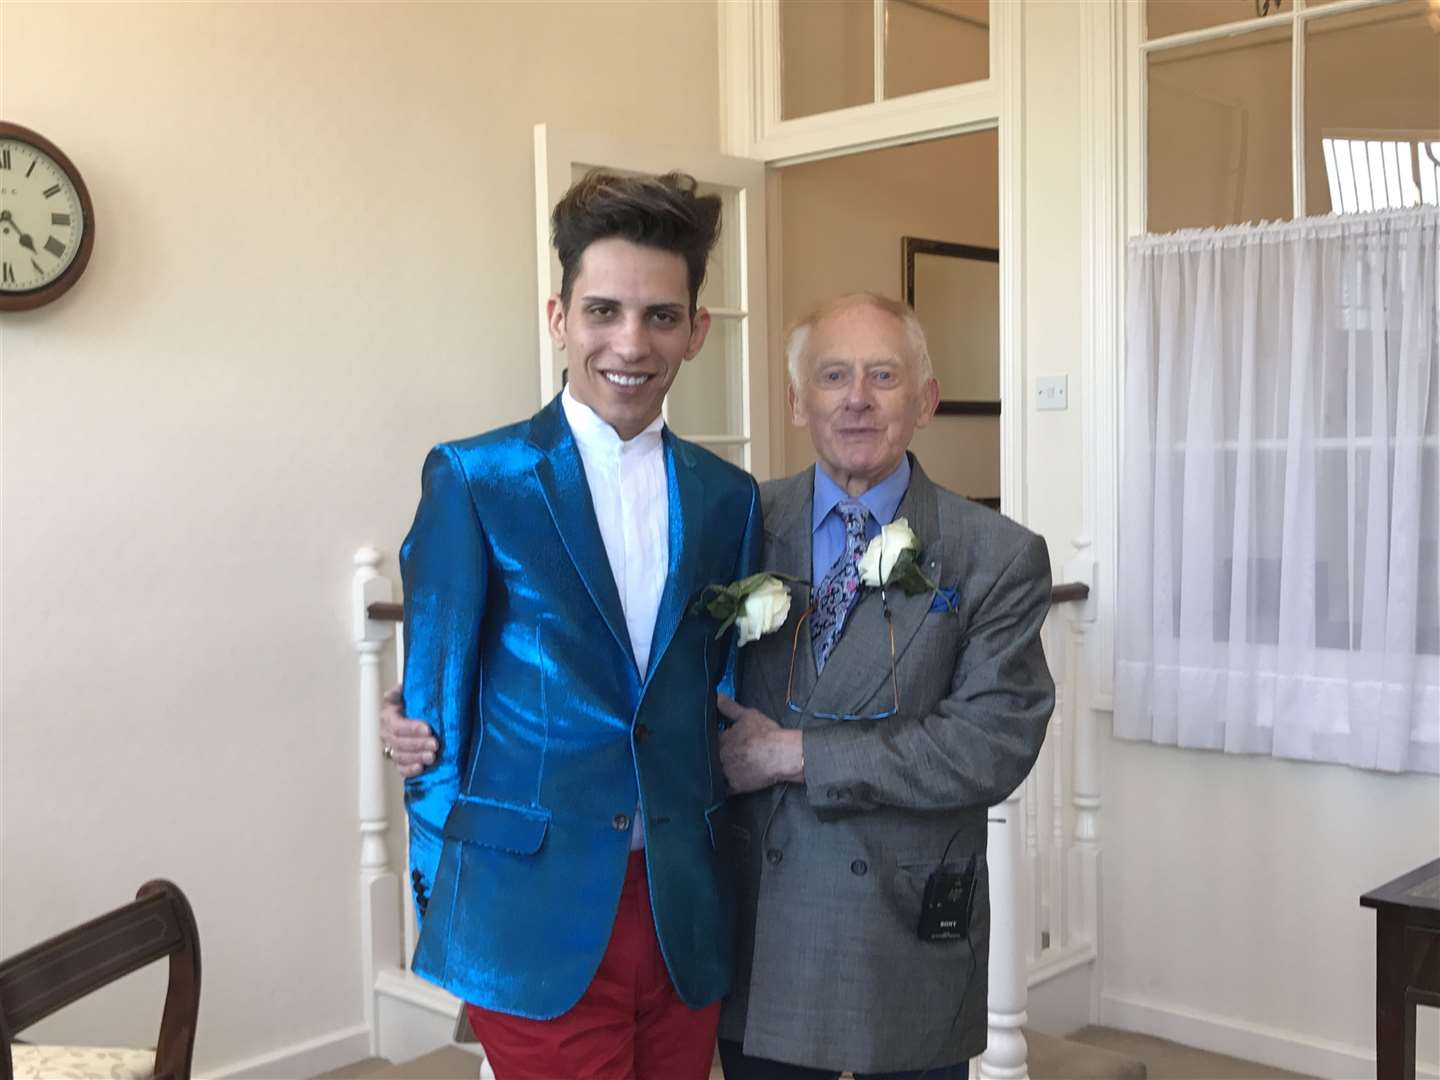 Florin Marin and Philip Clements tied the knot at Ramsgate Register Office